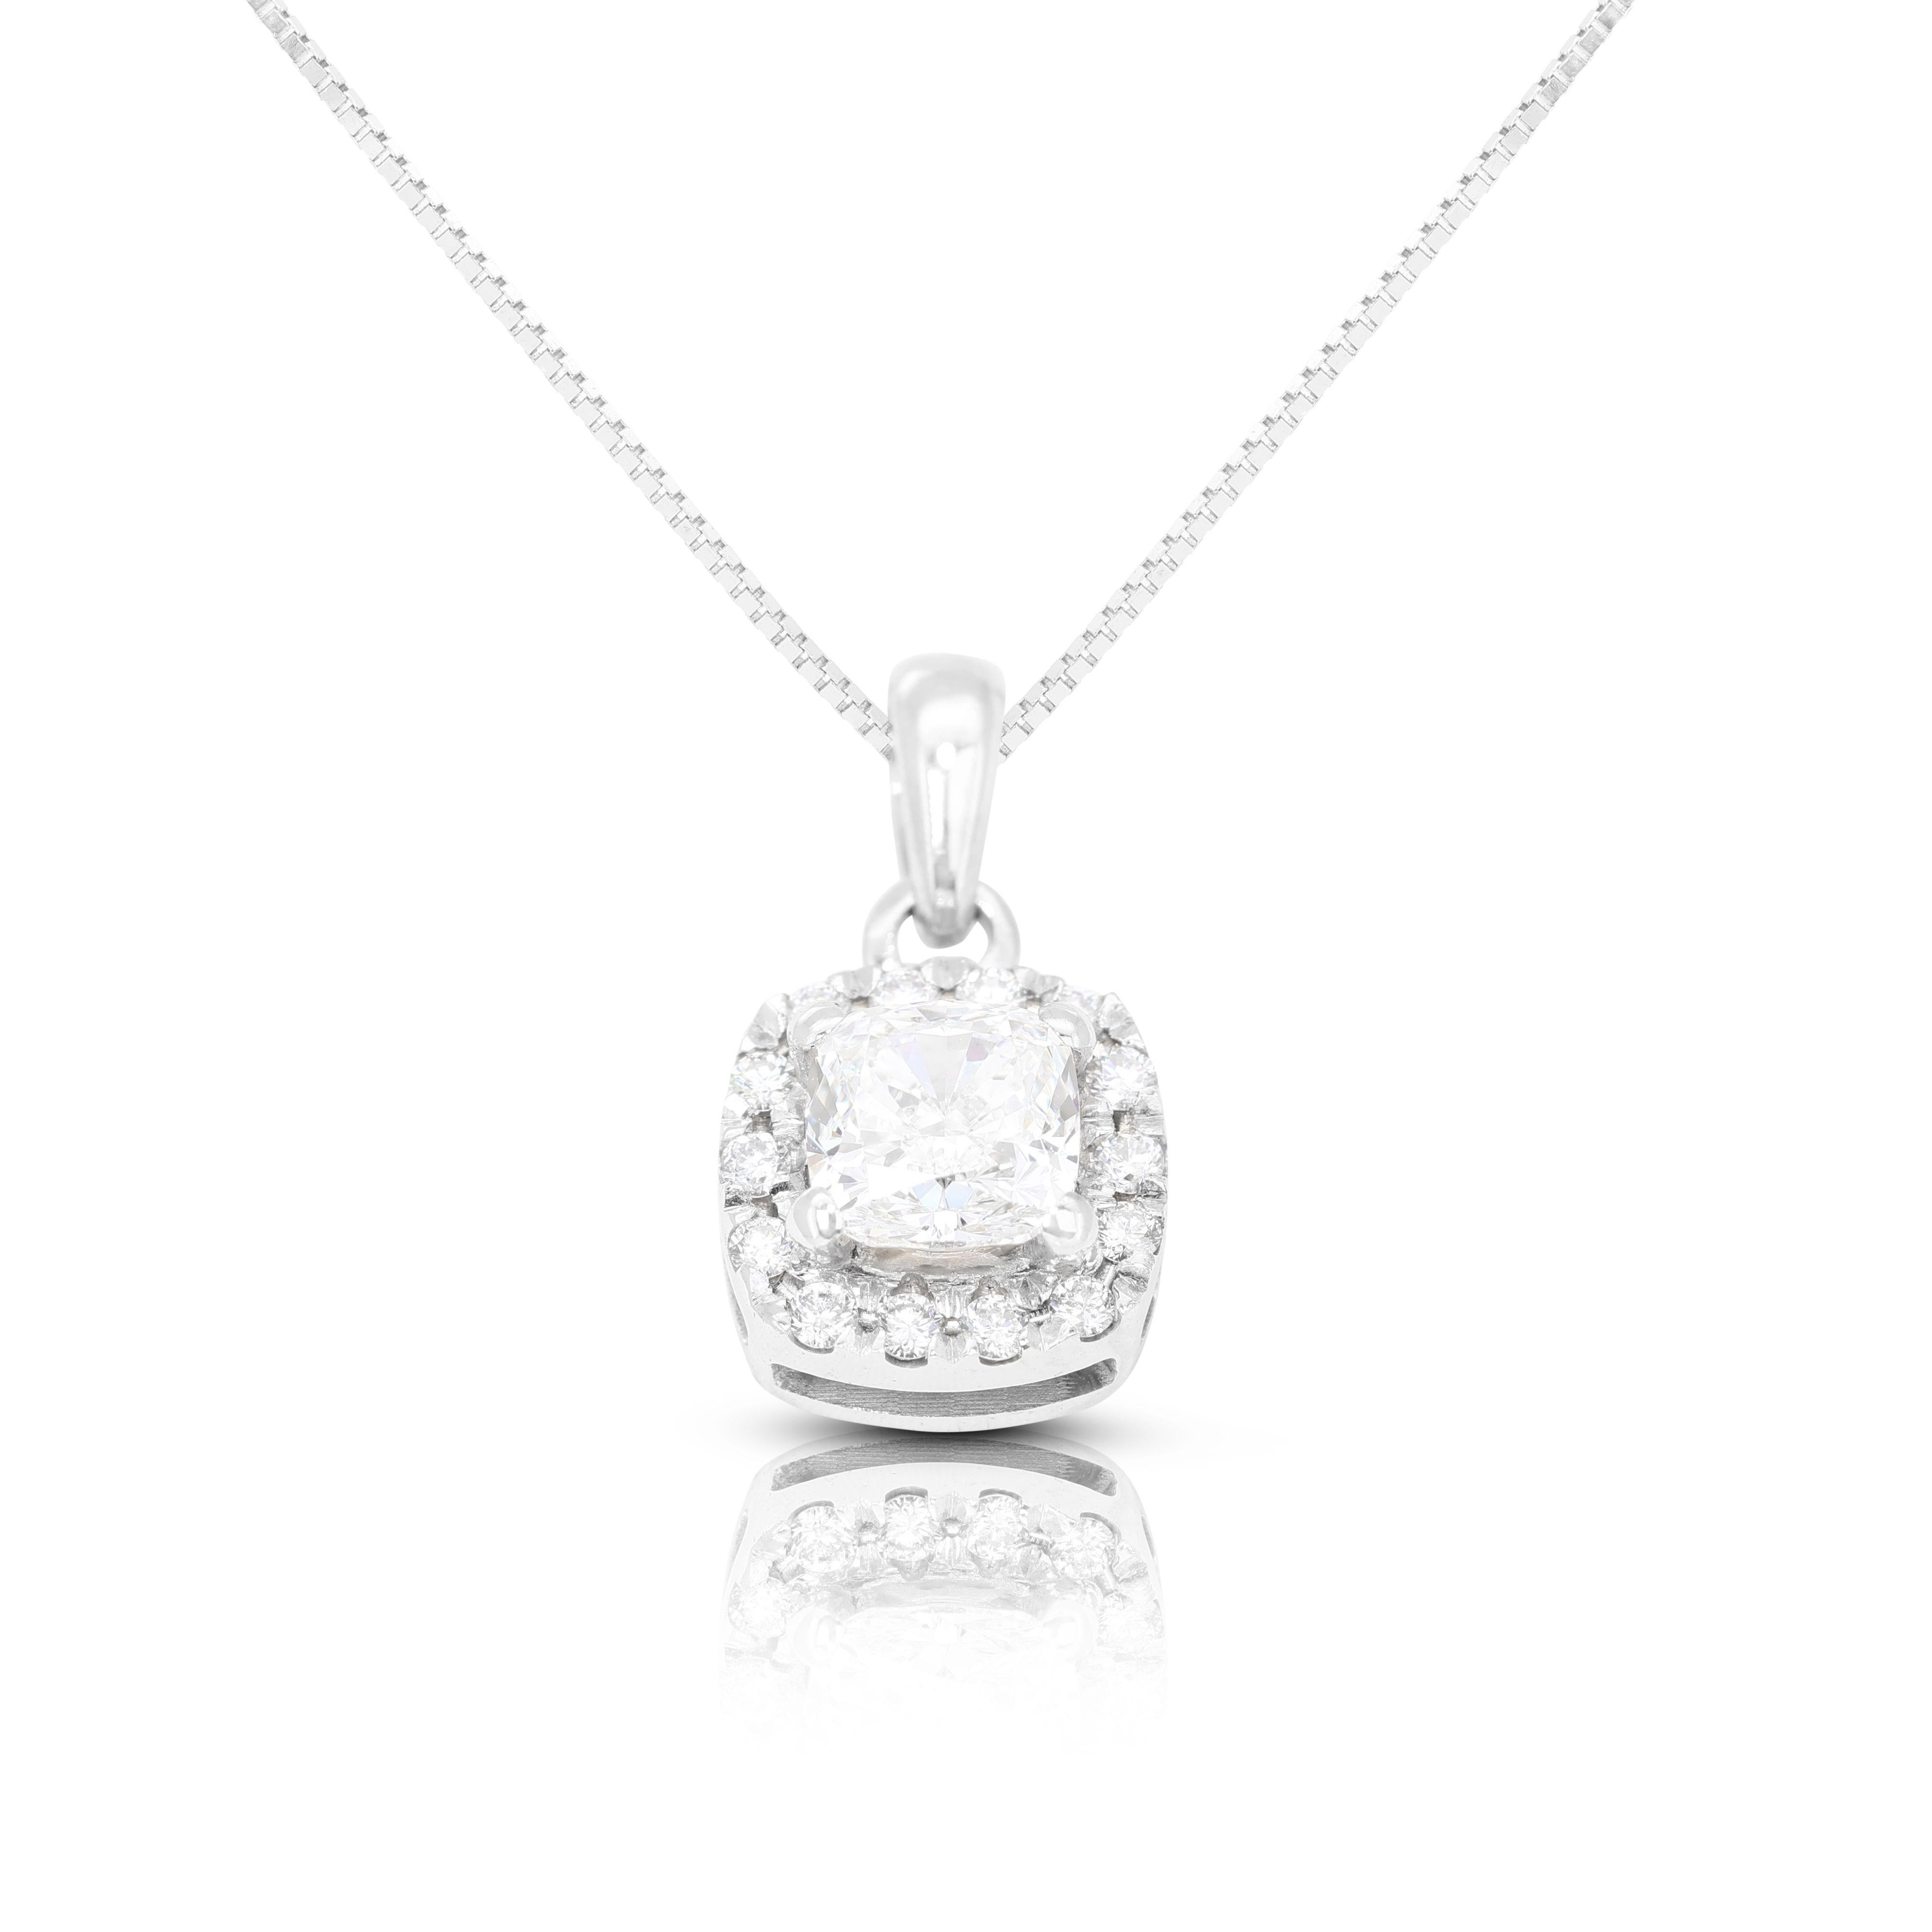 A gorgeous halo pendant with a dazzling 0.65 carat cushion and round brilliant diamonds. The jewelry is made of 18k white gold with a high quality polish. It comes with GIA Certificate and a fancy jewelry box.

Pendant only, (Chain not included)

1